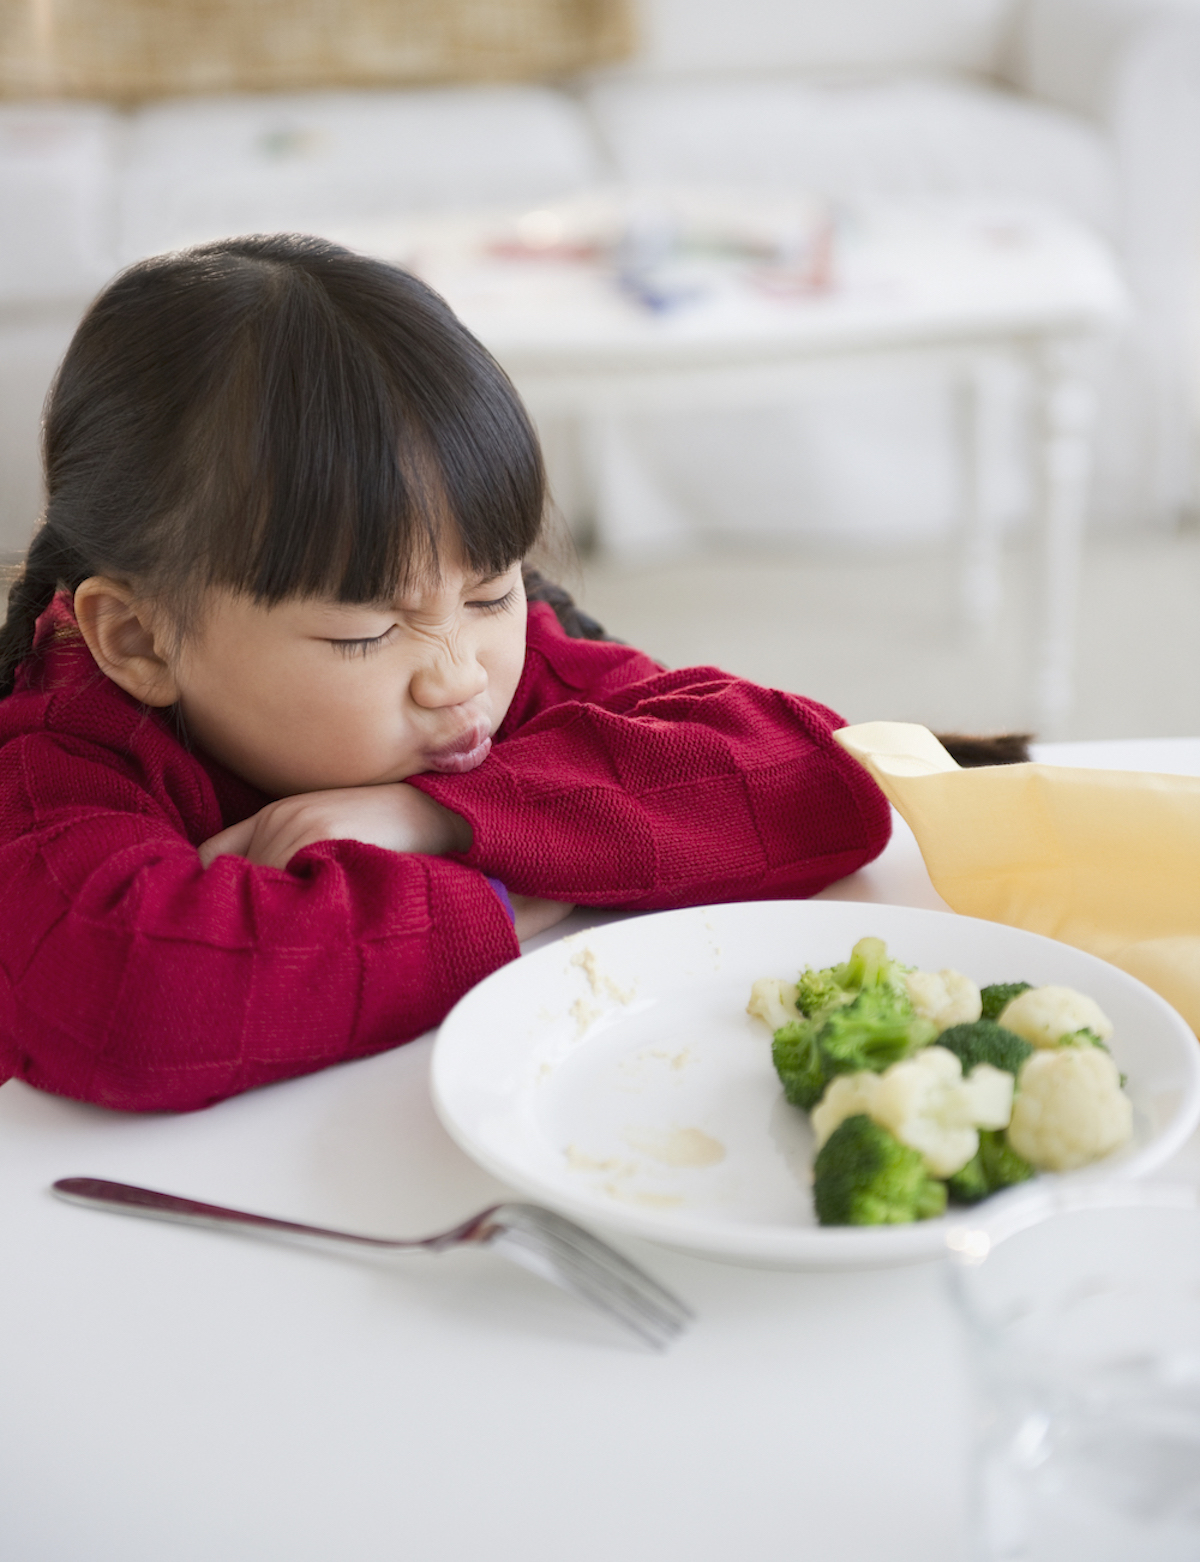 A child with their head resting on their arms makes a face at a bowl of broccoli and cauliflower.